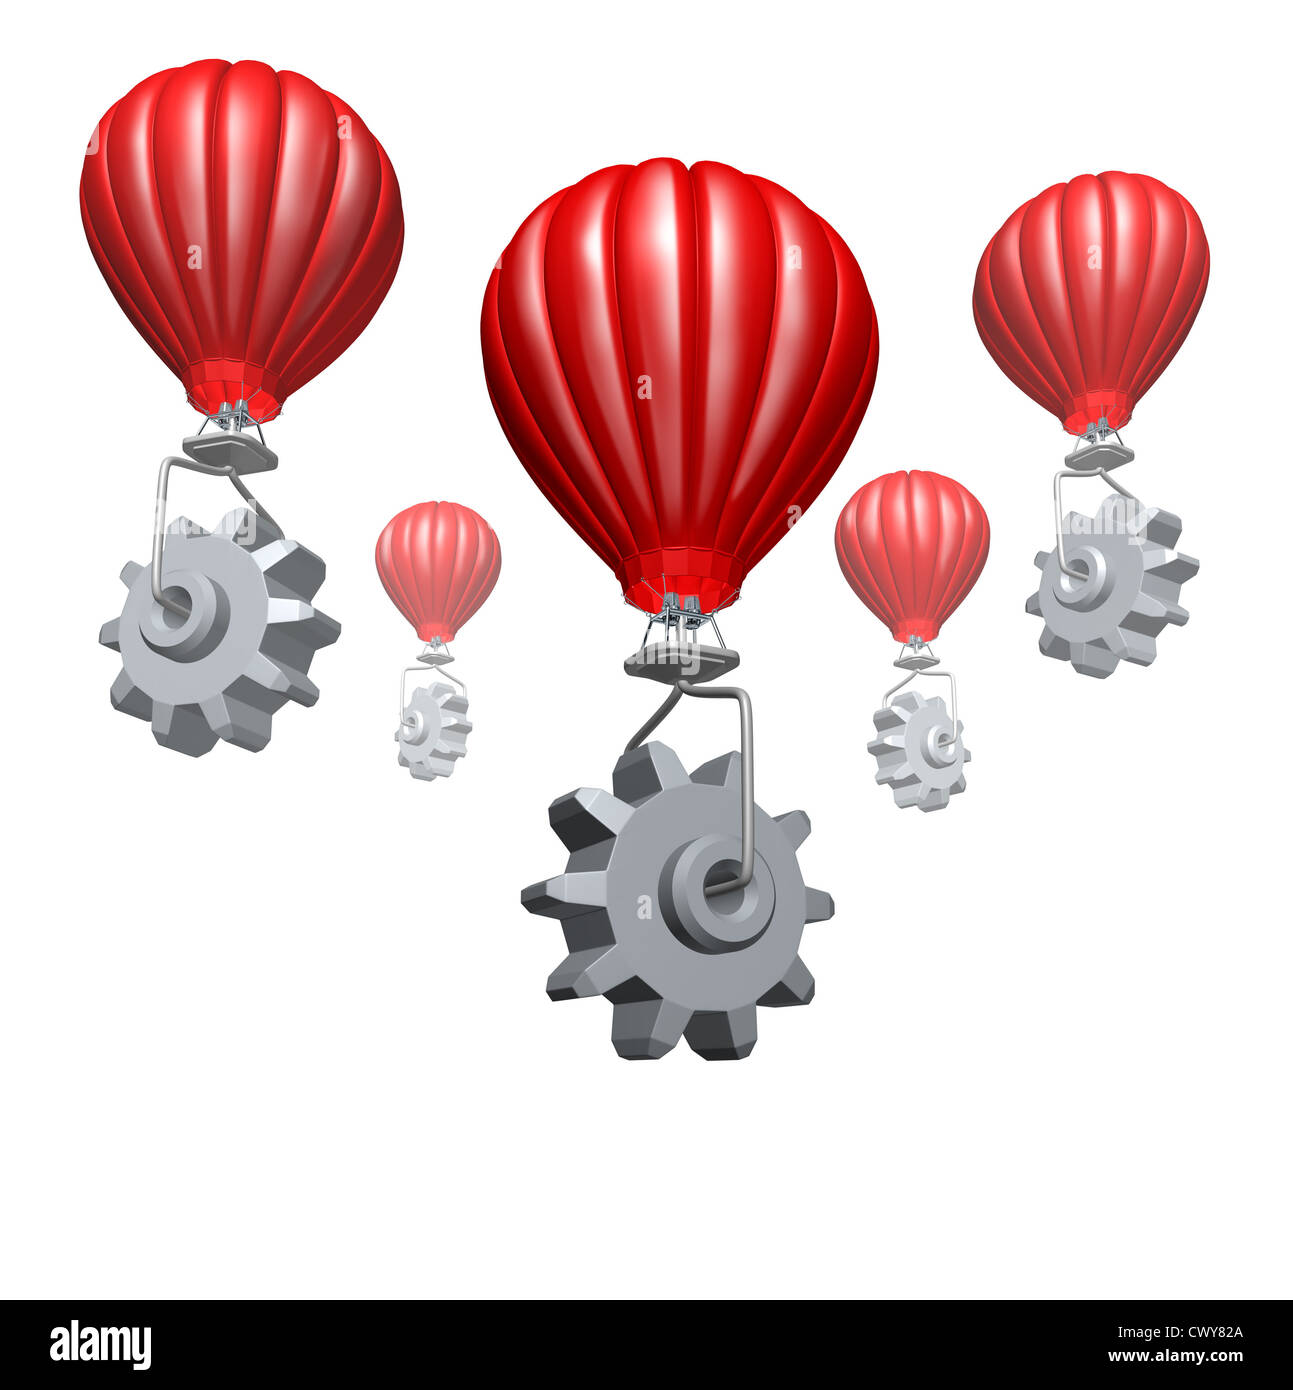 Cloud computing business and strategic partnership technology concept with hot air balloons with gears and cogs building a website or network of virtual servers for the internet on a white background. Stock Photo